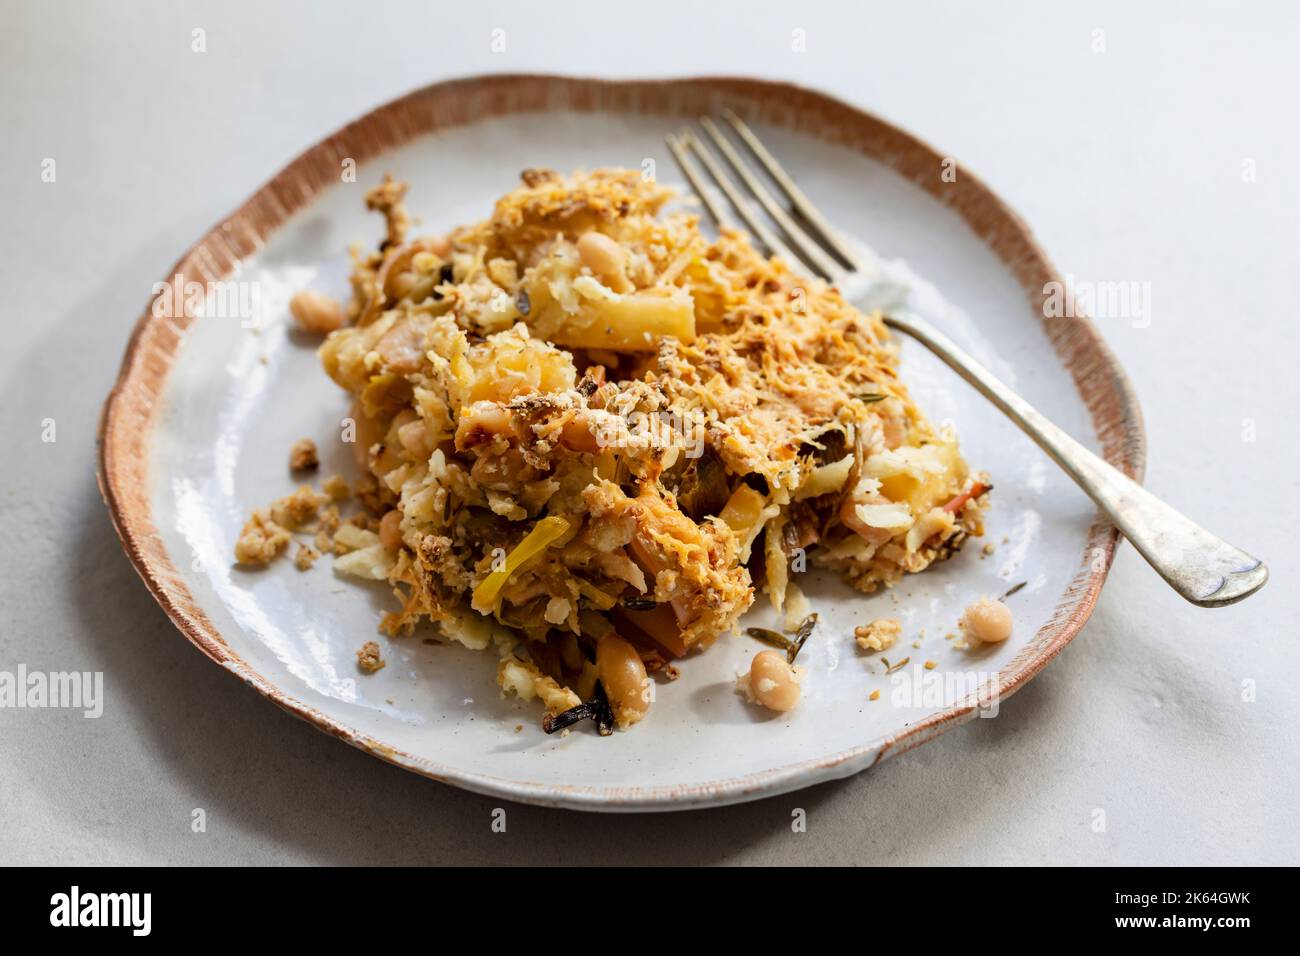 Vegan dish of parsnip, leek and bean crumble with crispy topping Stock Photo